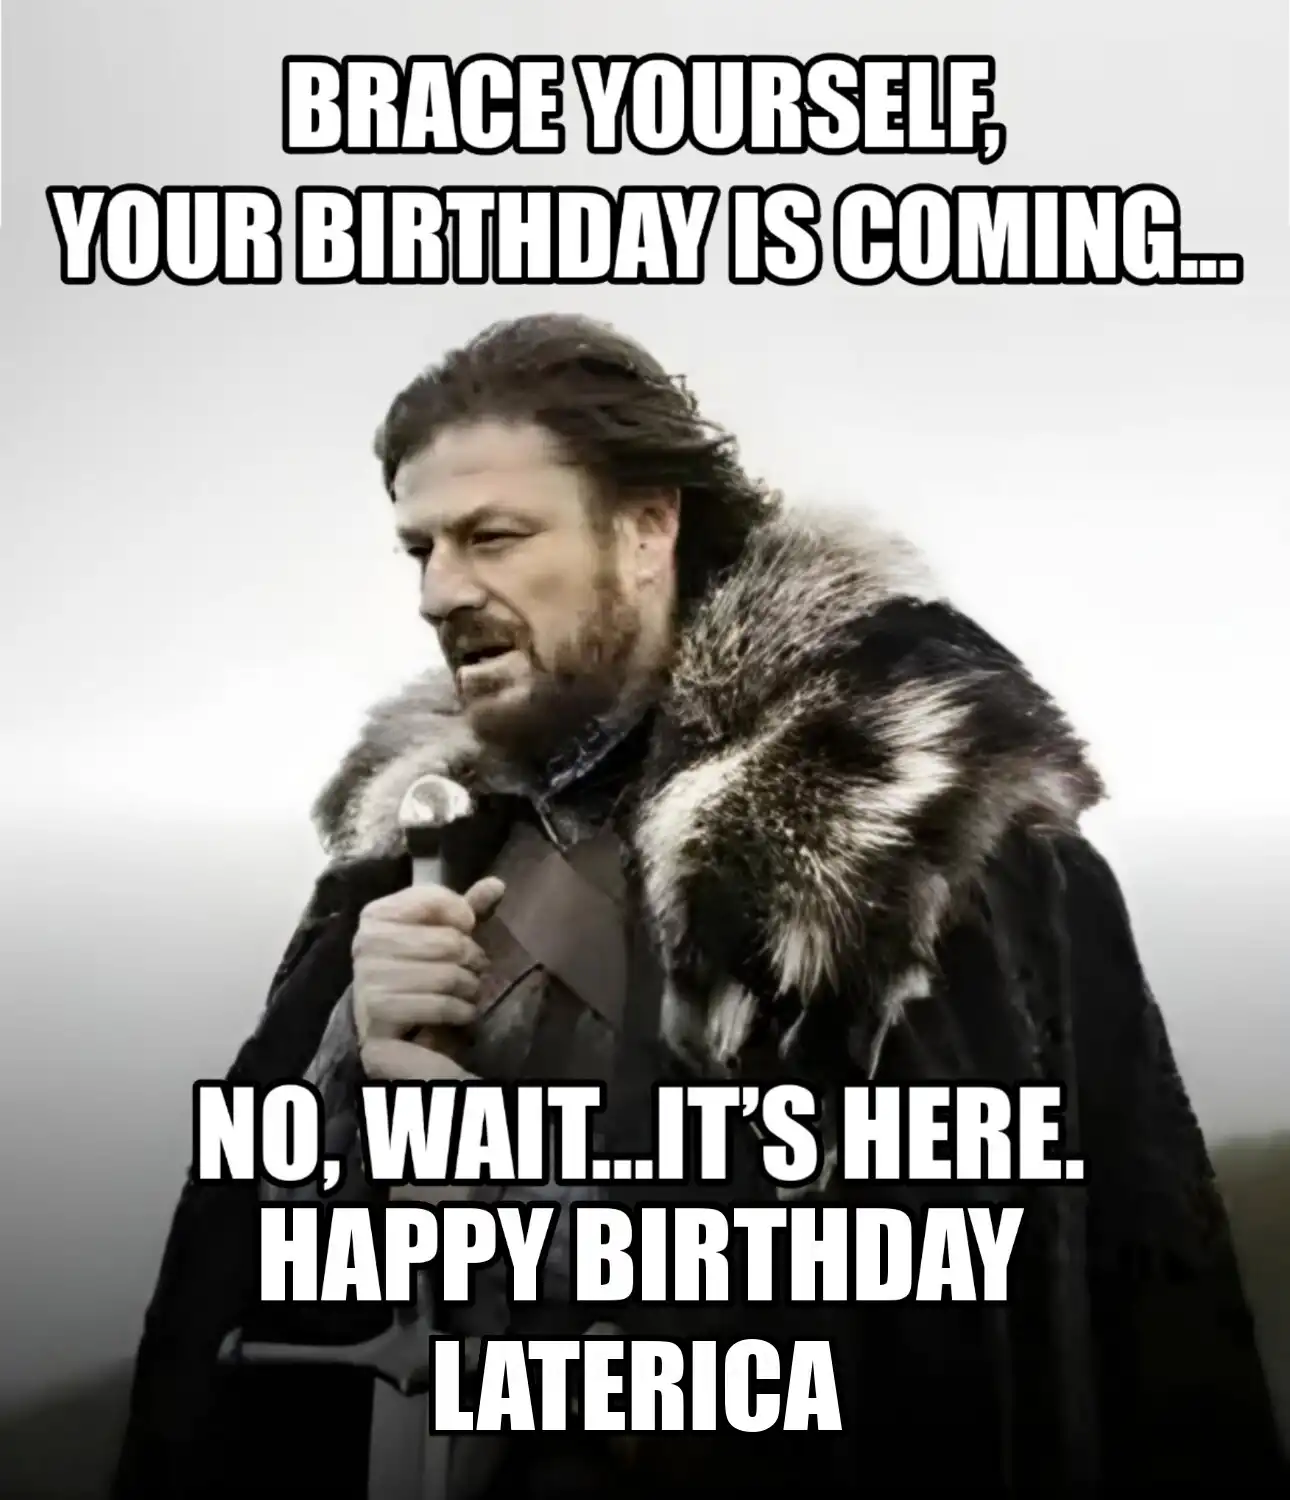 Happy Birthday Laterica Brace Yourself Your Birthday Is Coming Meme